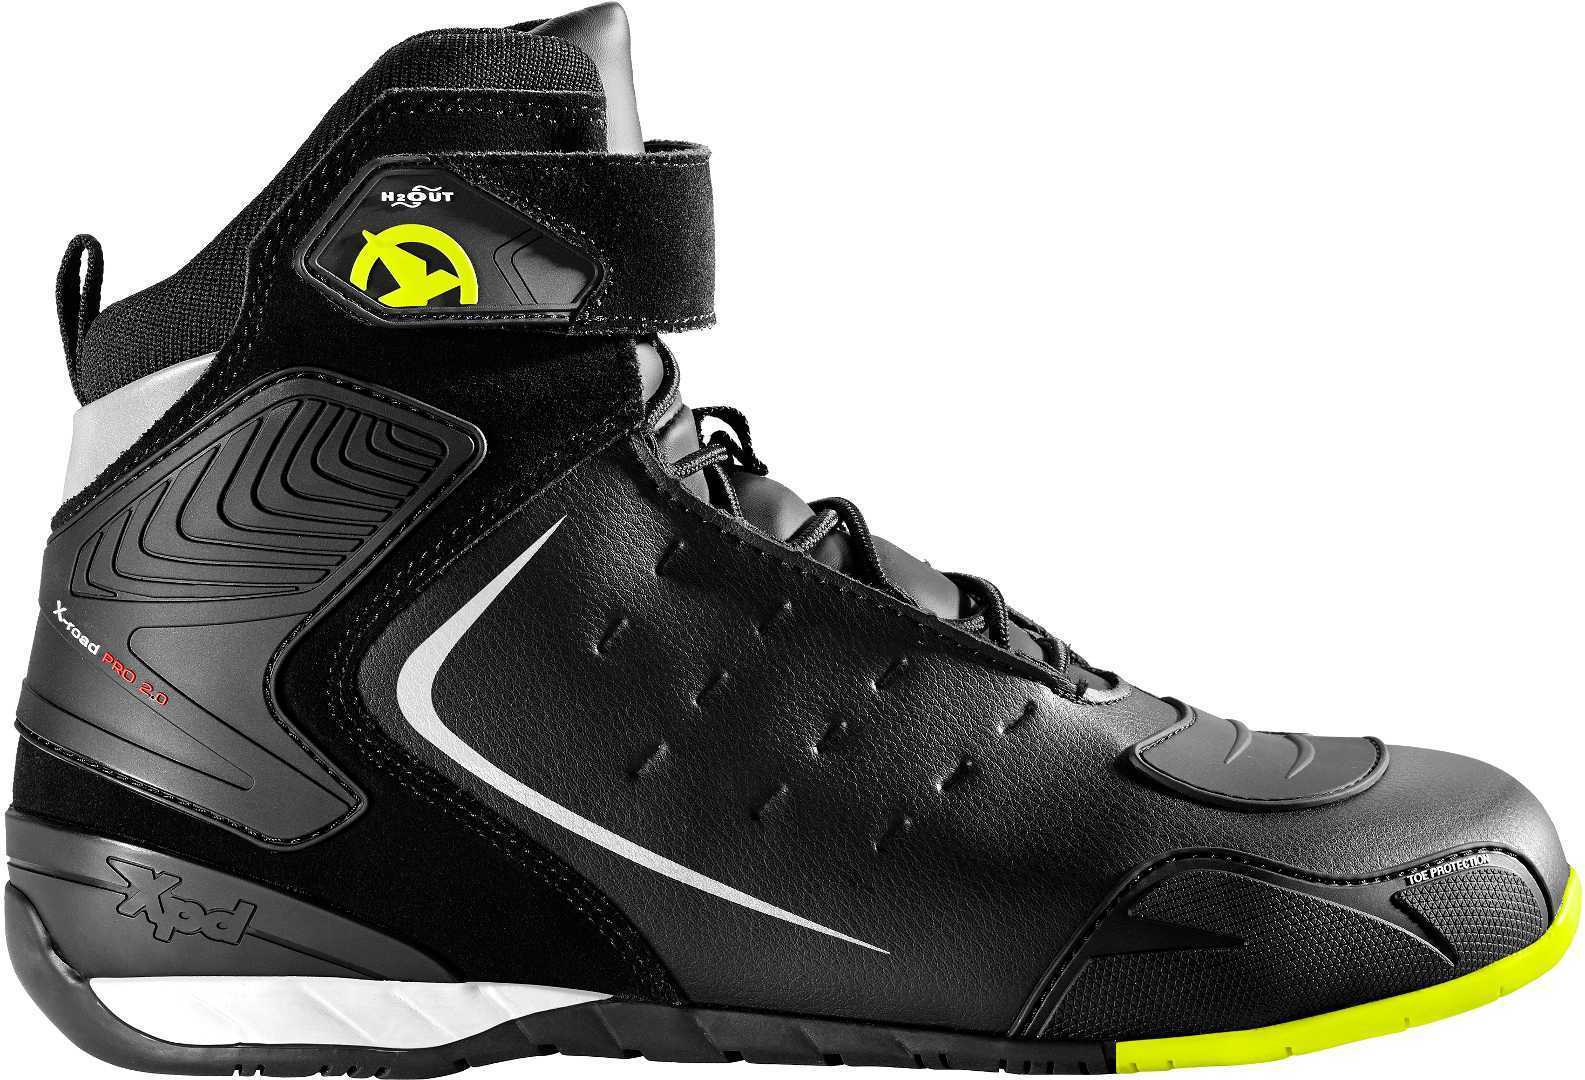 Image of EU XPD X-Road H2Out Jaune Fluo Chaussures Taille 43